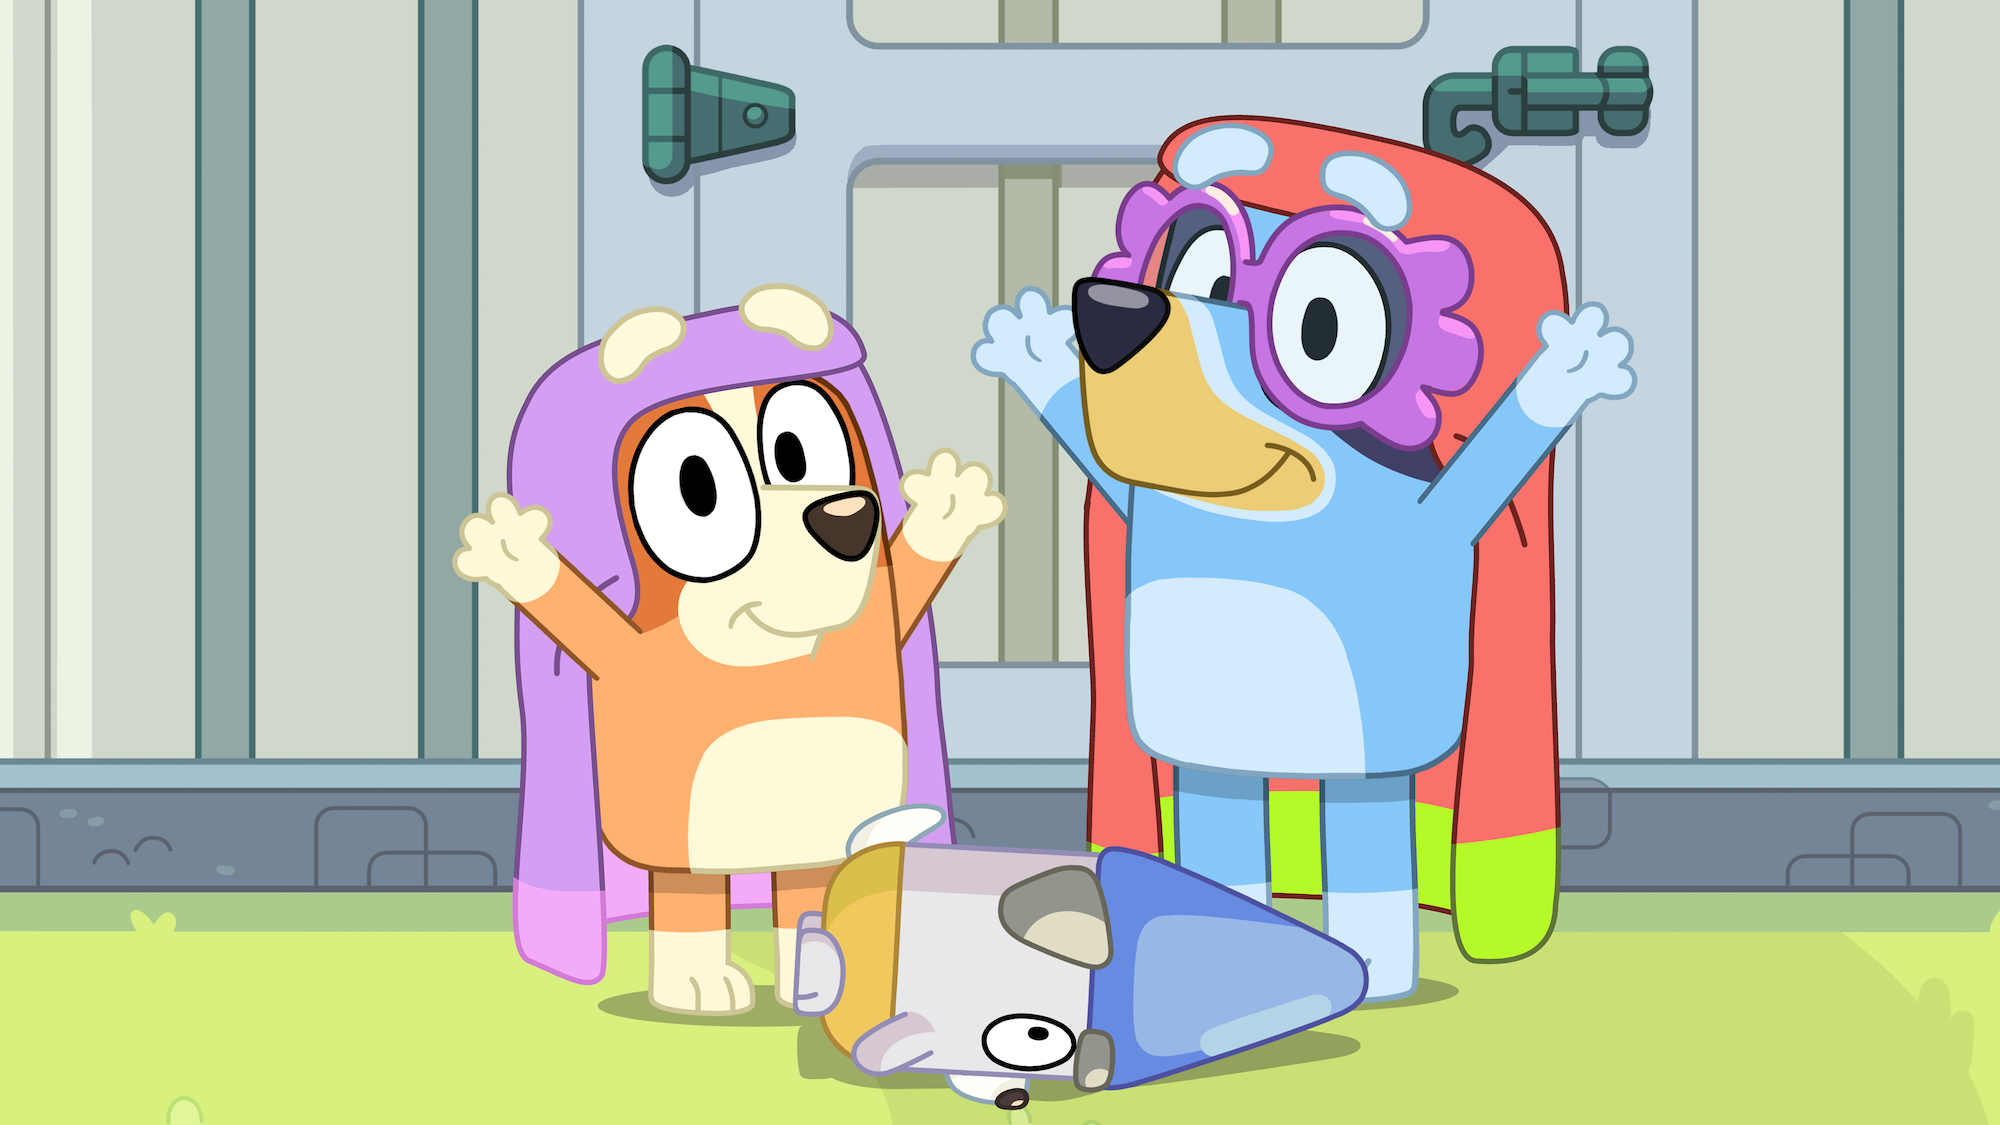 Bingo and Bluey dressed as their grannies characters